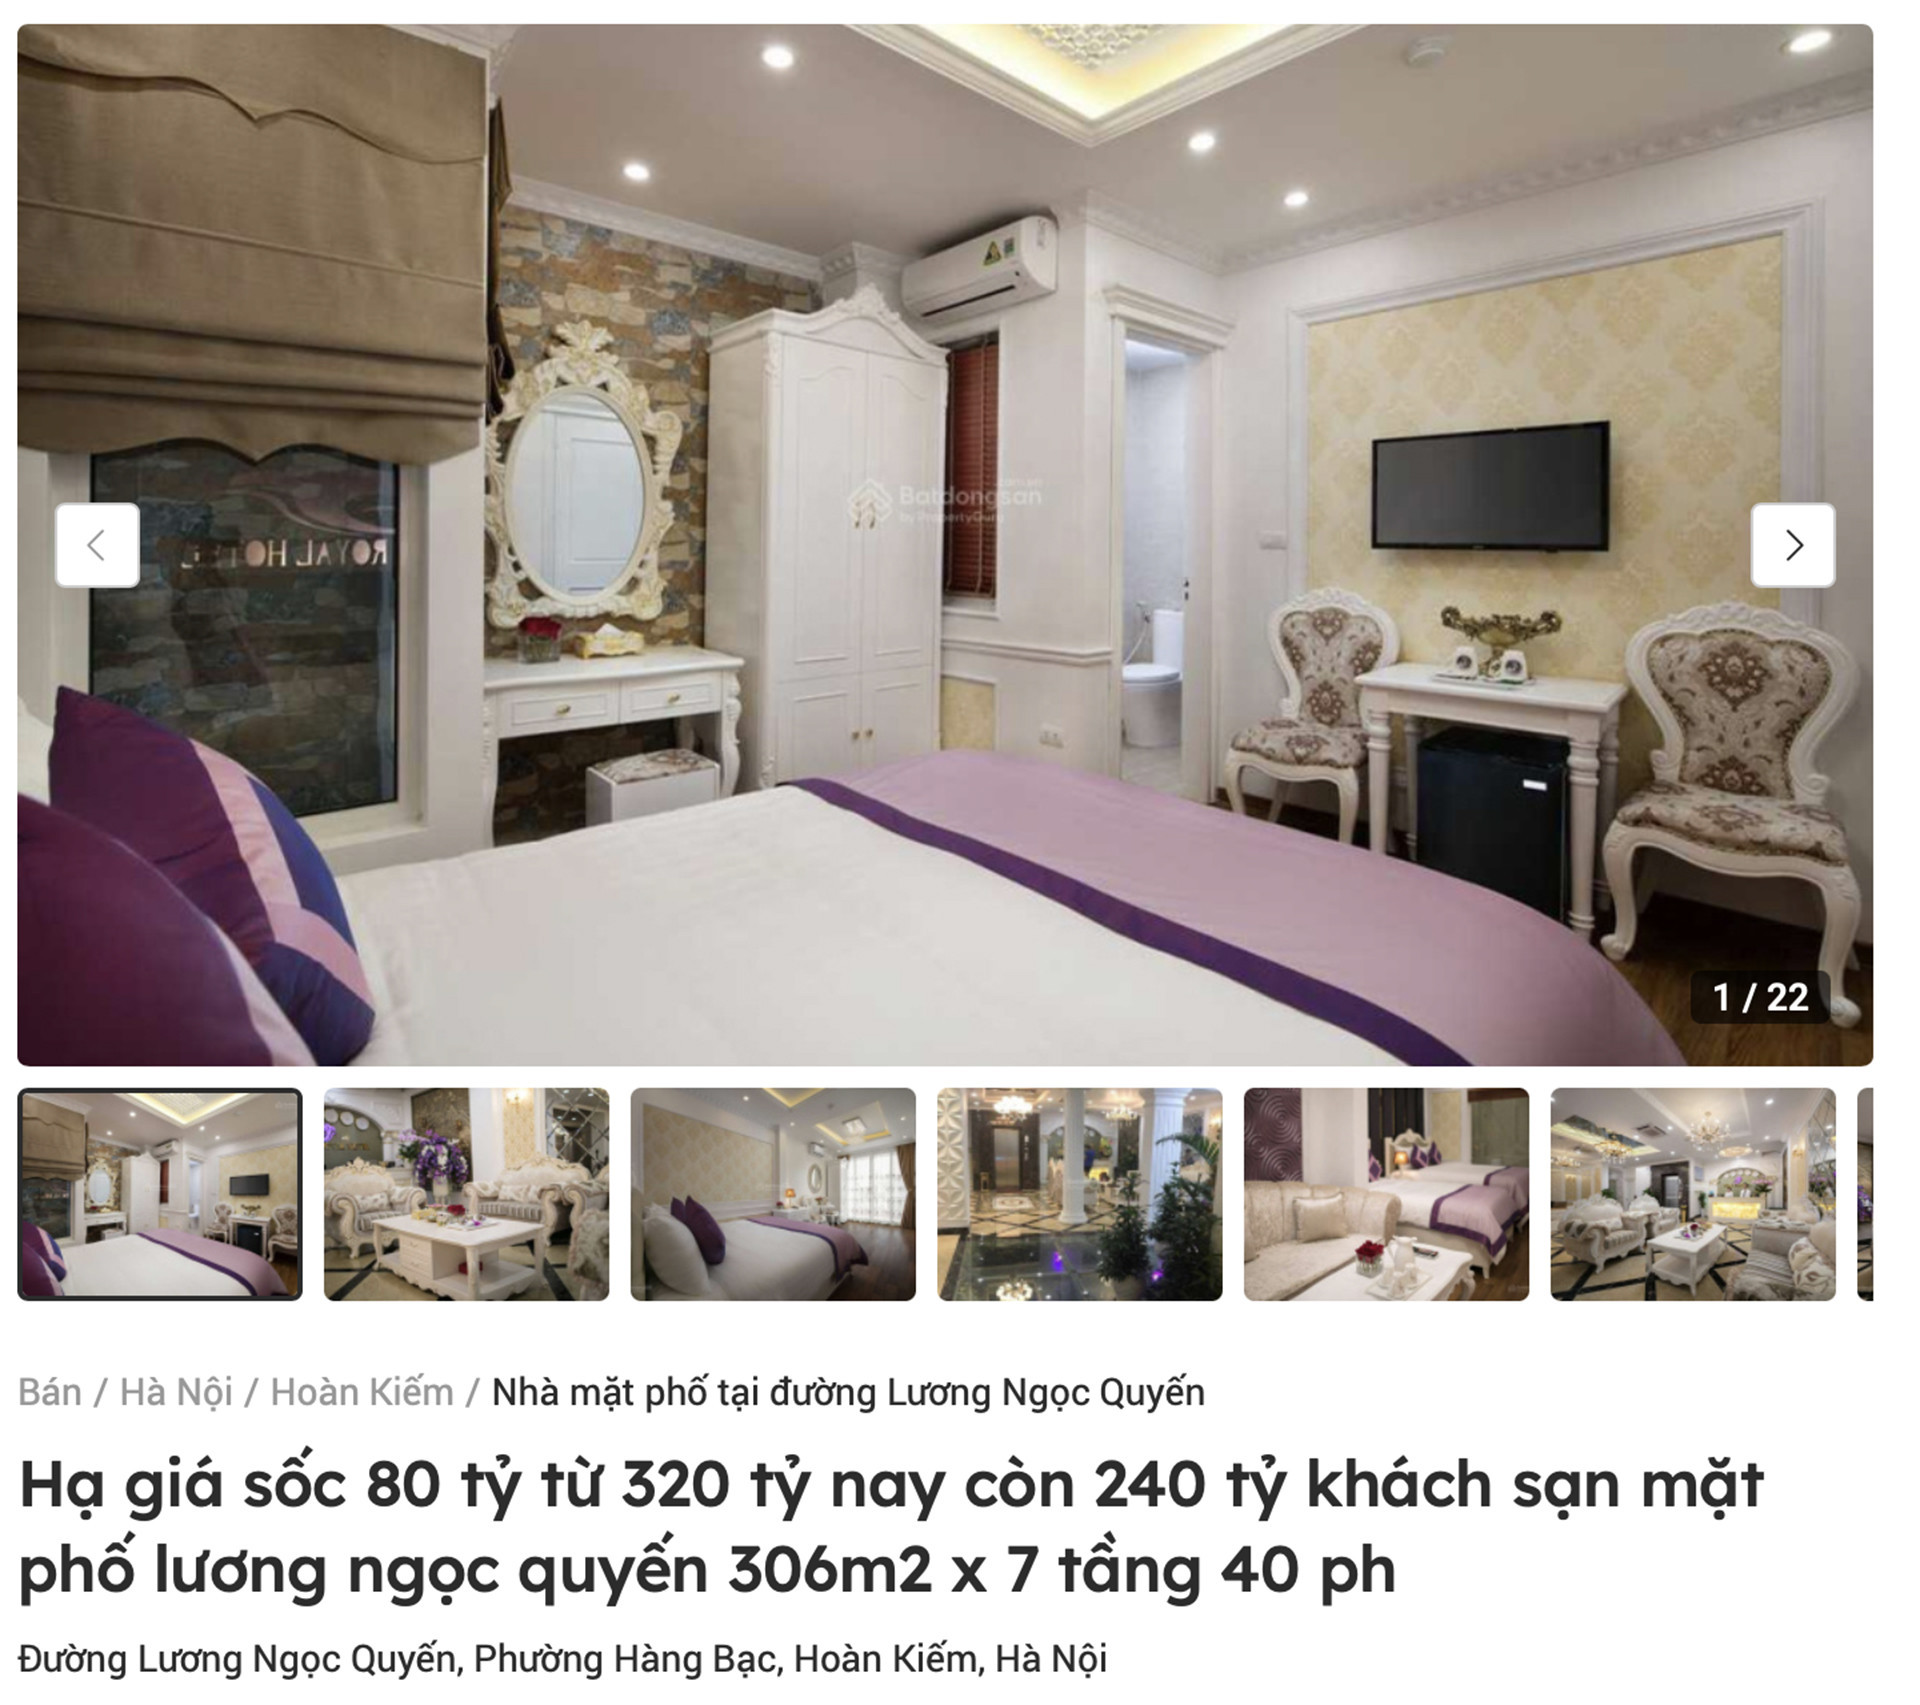 Hotels in Hanoi's Old Quarter up for sale amid low occupancy rates